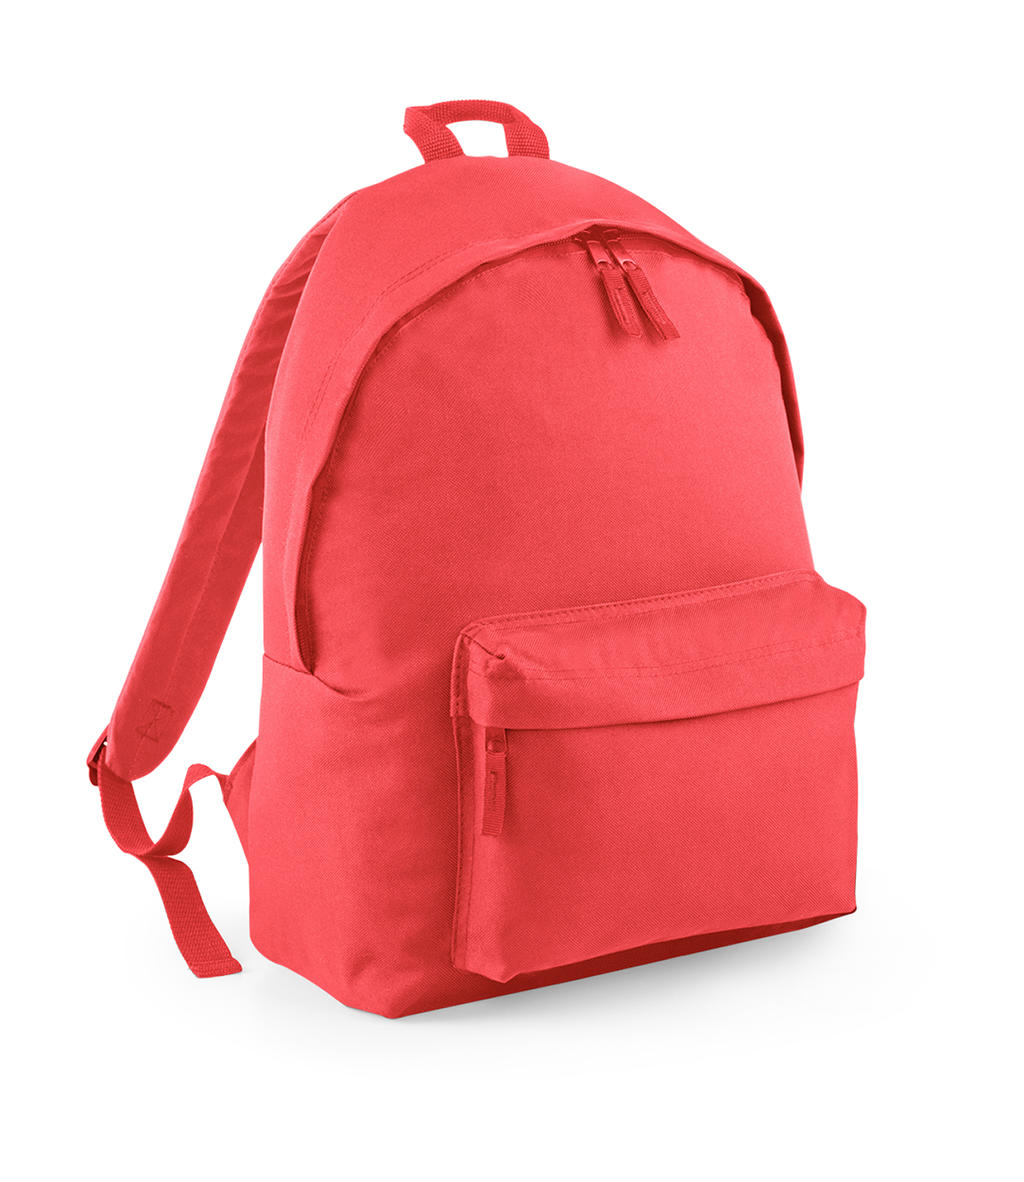  Original Fashion Backpack in Farbe Coral/Coral